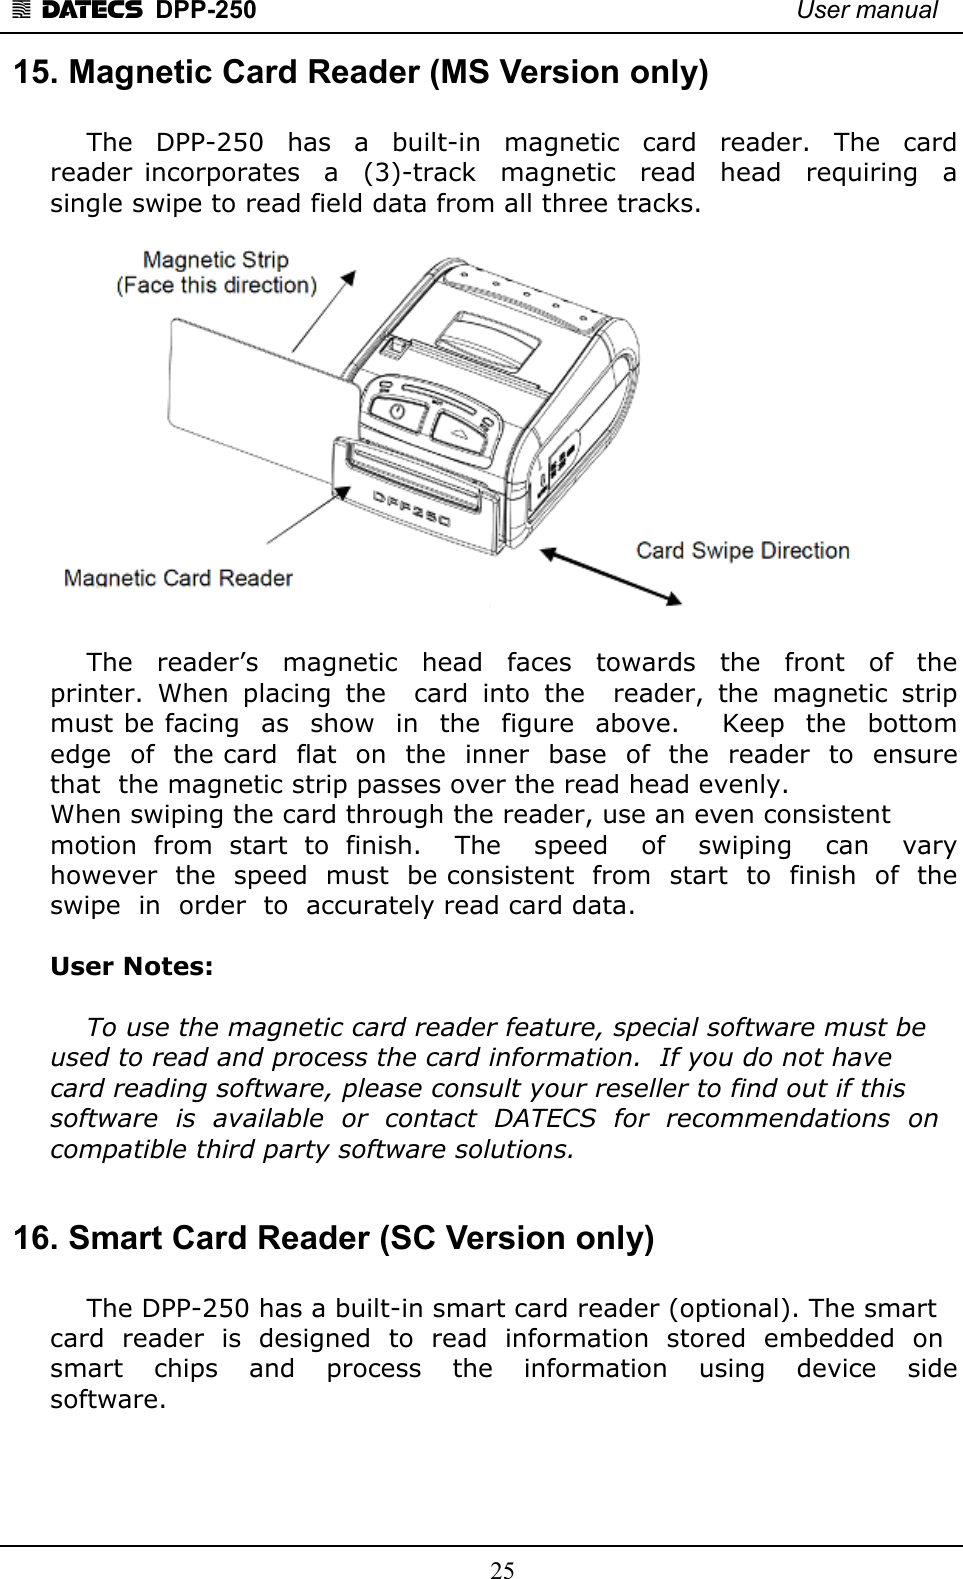 1 DATECS  DPP-250    User manual     25 15. Magnetic Card Reader (MS Version only)     The  DPP-250    has  a  built-in  magnetic  card    reader.  The  card reader  incorporates    a    (3)-track    magnetic    read   head    requiring    a  single swipe to read field data from all three tracks.        The    reader’s    magnetic   head    faces    towards    the   front    of    the  printer.  When  placing  the    card  into  the    reader,  the  magnetic  strip must be facing  as  show  in  the  figure  above.    Keep  the  bottom  edge  of  the card  flat  on  the  inner  base  of  the  reader  to  ensure  that  the magnetic strip passes over the read head evenly.  When swiping the card through the reader, use an even consistent  motion  from  start  to  finish.    The    speed    of    swiping    can    vary  however  the  speed  must  be consistent  from  start  to  finish  of  the  swipe  in  order  to  accurately read card data.    User Notes:    To use the magnetic card reader feature, special software must be  used to read and process the card information.  If you do not have  card reading software, please consult your reseller to find out if this  software  is  available  or  contact  DATECS  for  recommendations  on  compatible third party software solutions.   16. Smart Card Reader (SC Version only)     The DPP-250 has a built-in smart card reader (optional). The smart  card  reader  is  designed  to  read  information  stored  embedded  on  smart    chips    and    process    the    information    using    device    side software.  